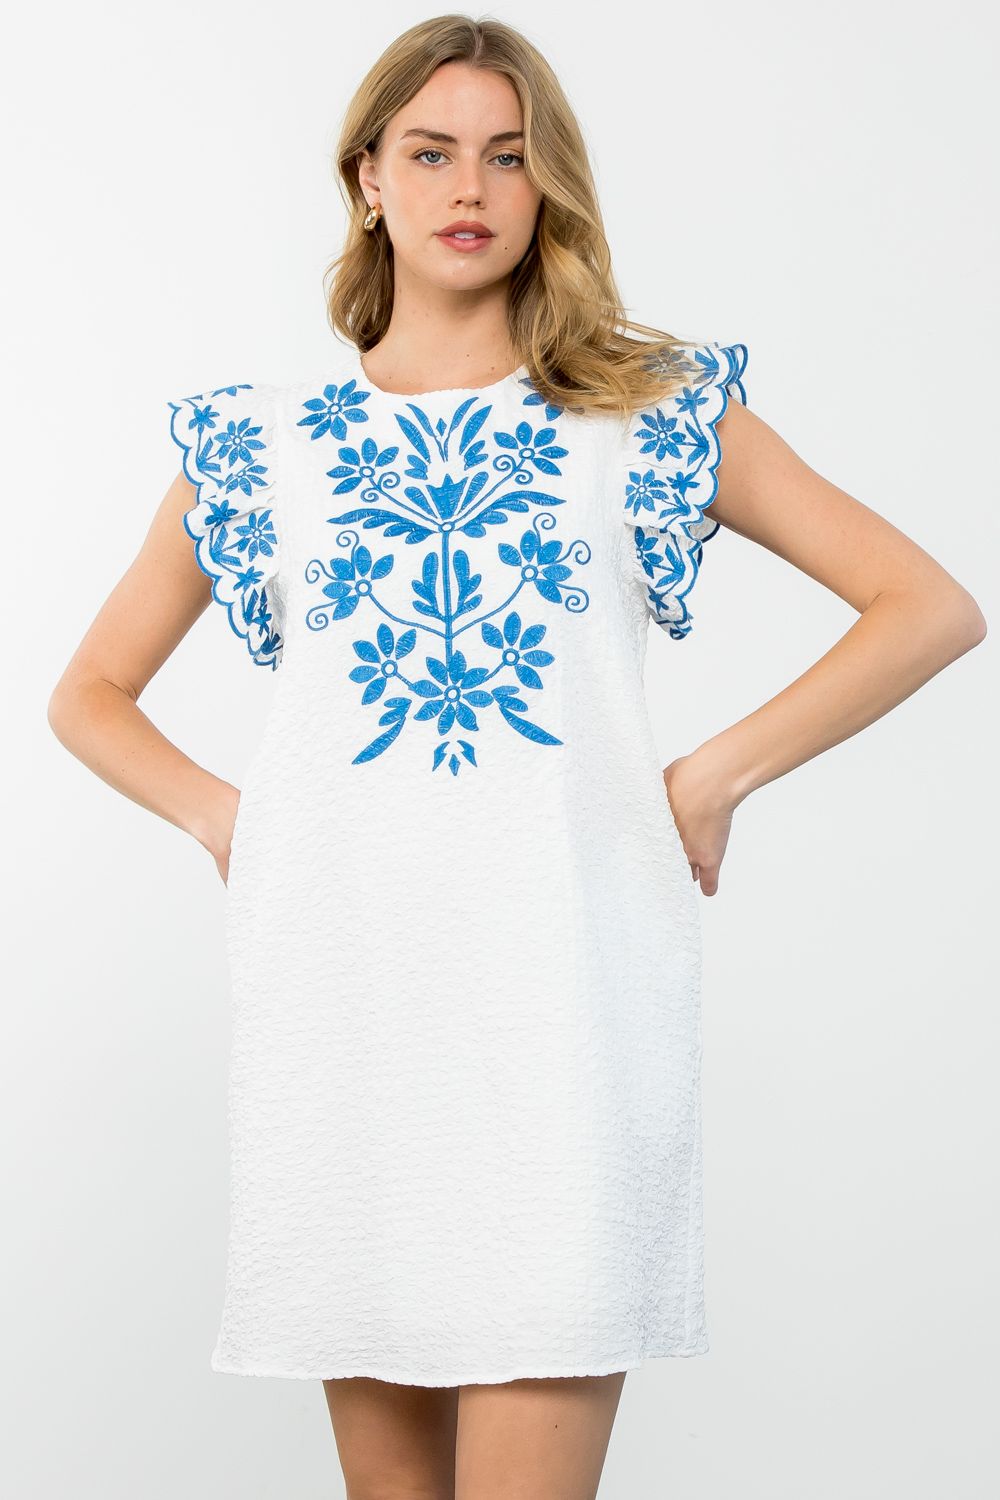 White Dress with Royal Blue Embriodery